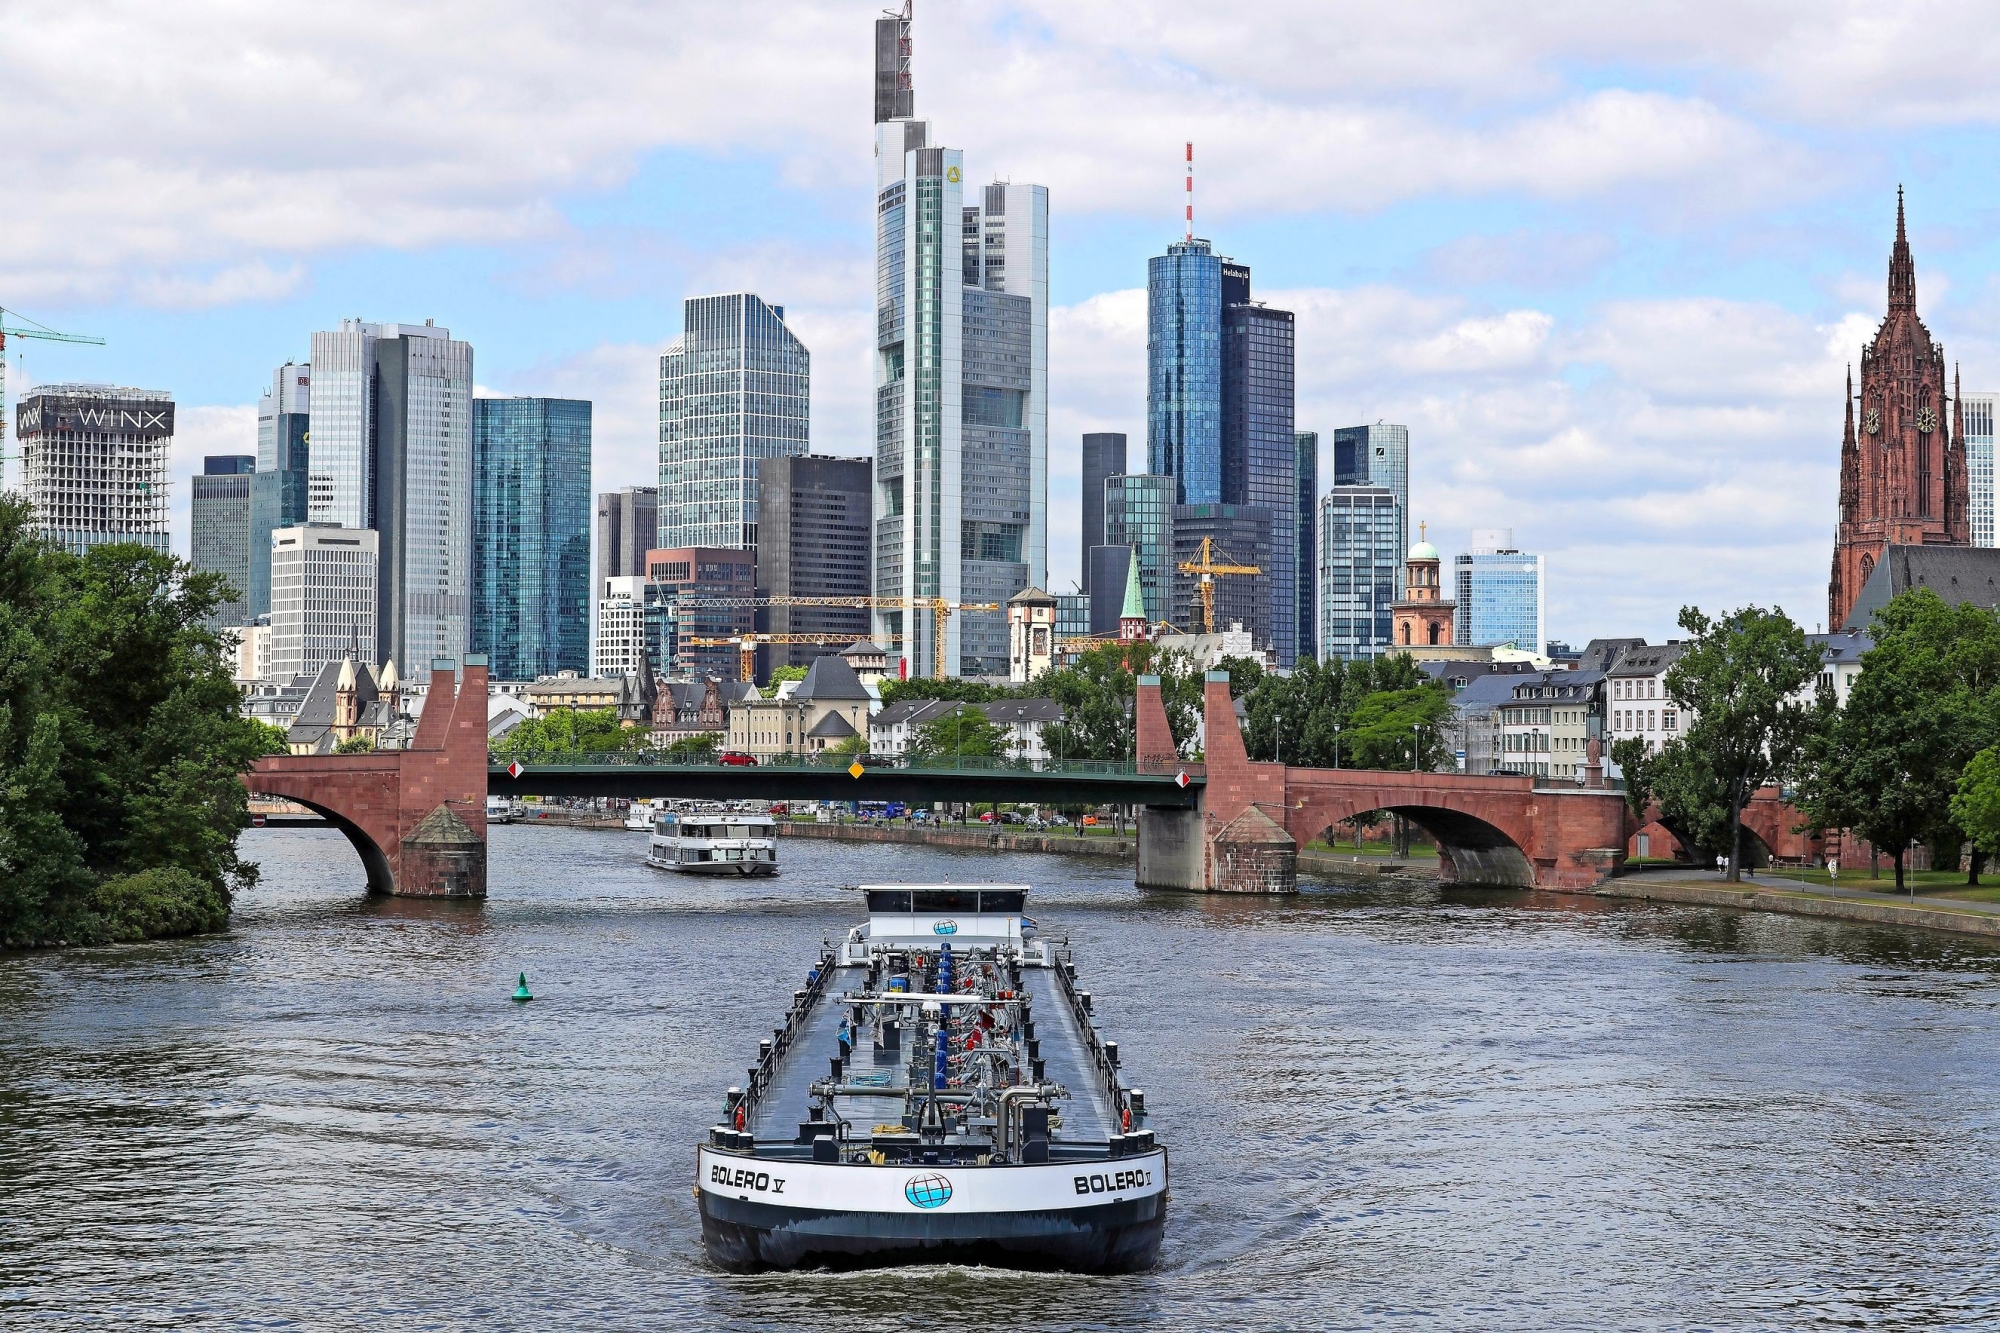 epa06771088 (FILE) - River barge 'Bolero V' navigates on Main river in Frankfurt Main, Germany, 13 July 2017 with the city financial district and high-rise bank buildings on background (re-issued 29 May 2018). Reports on 29 May 2018 state European banking sector shares are suffering from being hit by the continuing political crisis and uncertainty in Italy. The Euro Stoxx banking index suffered a loss of 4.6 per cent. Shares of major lenders suffered losses, among them Deutsche Bank that was 4.5 per cent down, and Unicredit that saw their share price slide 6.6 per cent.  EPA/ARMANDO BABANI (FILE) GERMANY ECONOMY ITALY